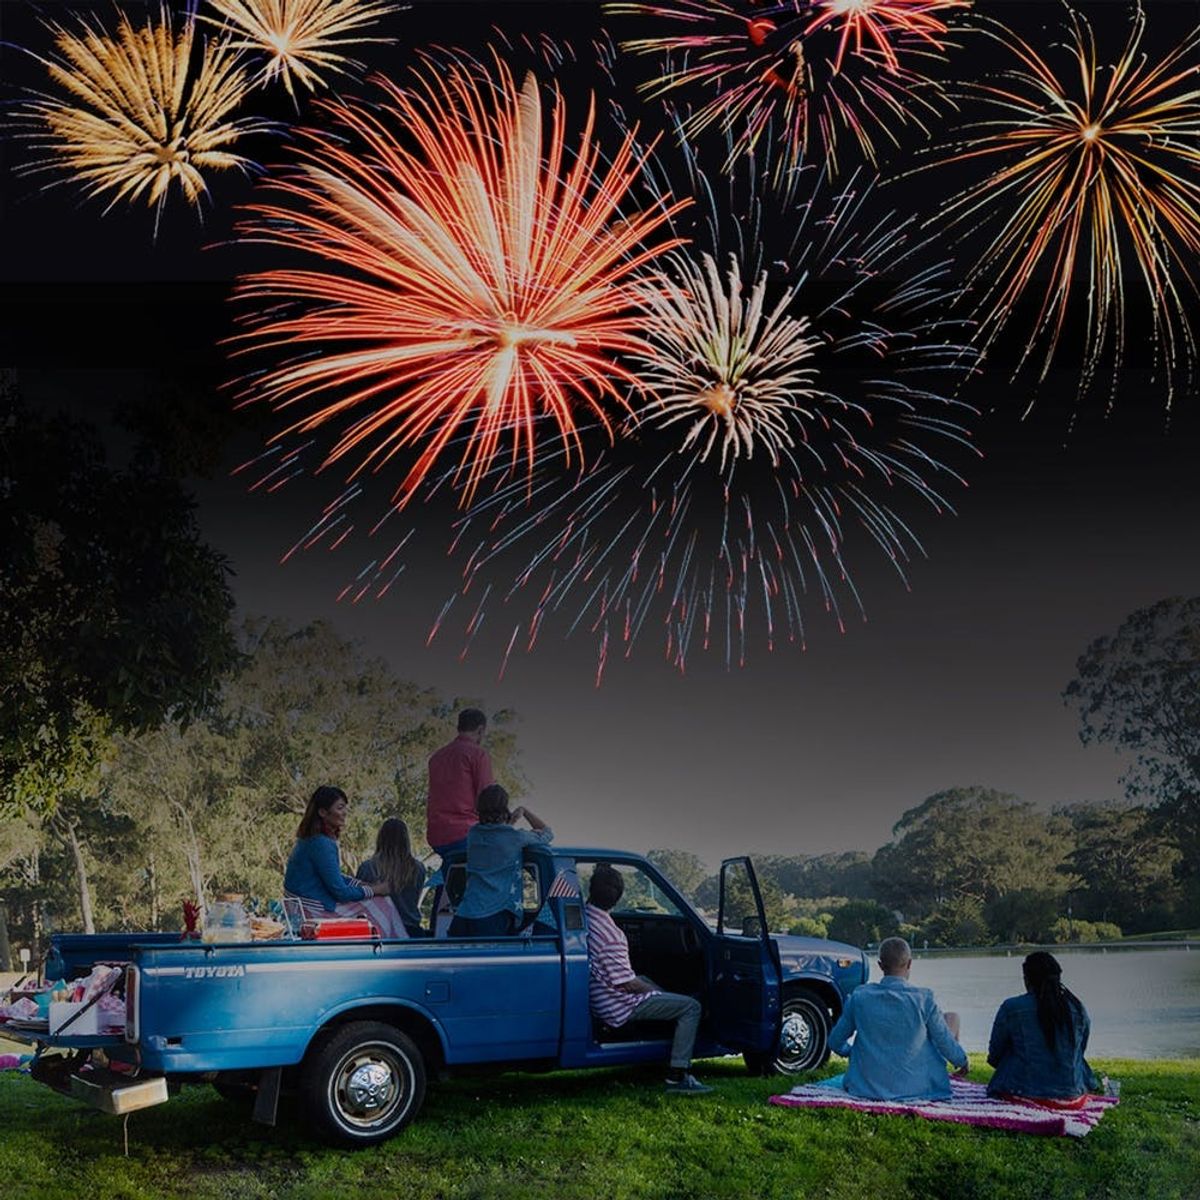 Pack Up the Truck and Throw a Tailgate Party for This 4th of July